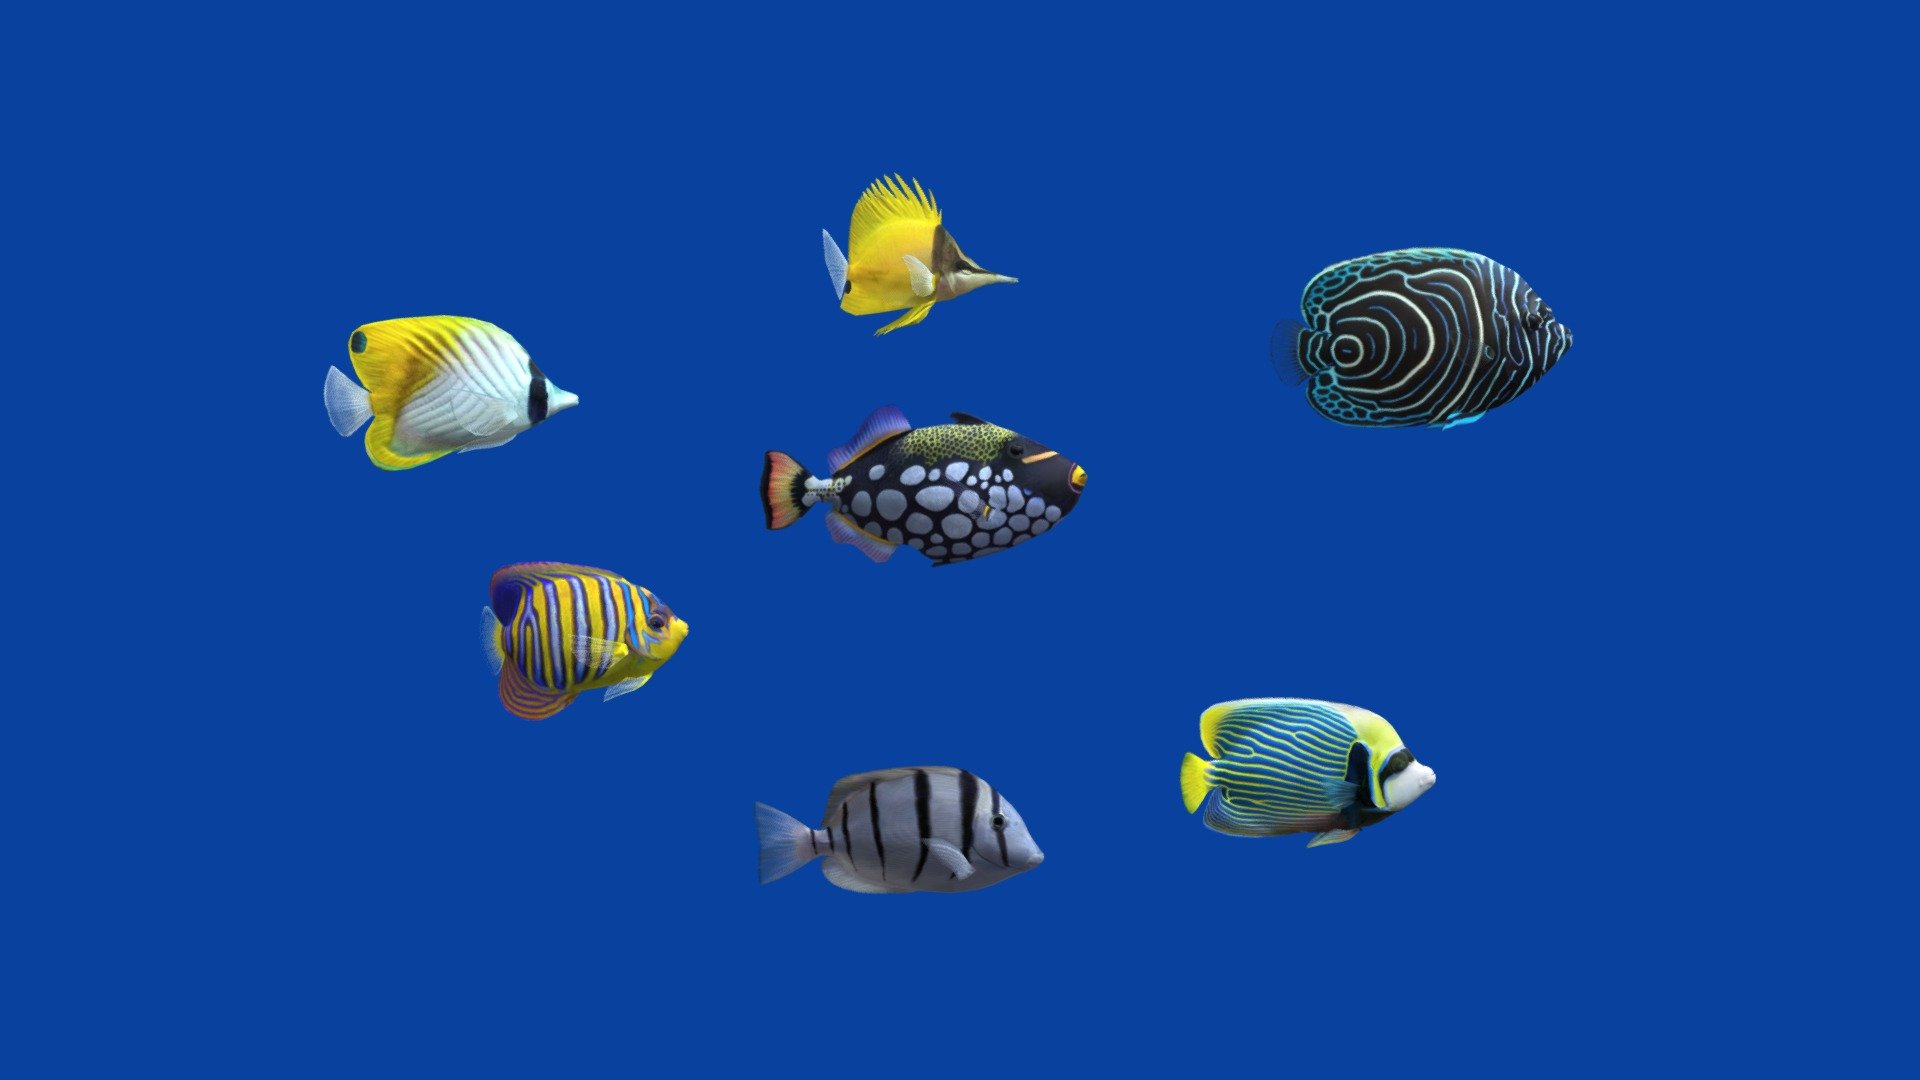 Before purchasing this model, you can free download Emperor Angelfish and try to import it. 



The pack includes next animation loops:

1 Clow Triggerfish............ (idle 1-302)

2 Convict Tang.................. (idle 1-299)

3 Emperor Angelfish ........(idle 1-499)

4 Juvenile Angelfish .........(idle 1-480)

5 Royal Angelfish............. (idle 1-499)

6 Threadfin ...................... (idle 1-240)

7 Yellow Longnose............(idle 1-250)


Other Coral Fish Packs:

Pack3 - Aquarium Fish 7: https://skfb.ly/oCQSN

Pack1 - Coral Fish 7: https://skfb.ly/ouUWz



The Tropical Fish Pack includes 7 fish. 

This is the second pack of series &ldquo;Coral Fish